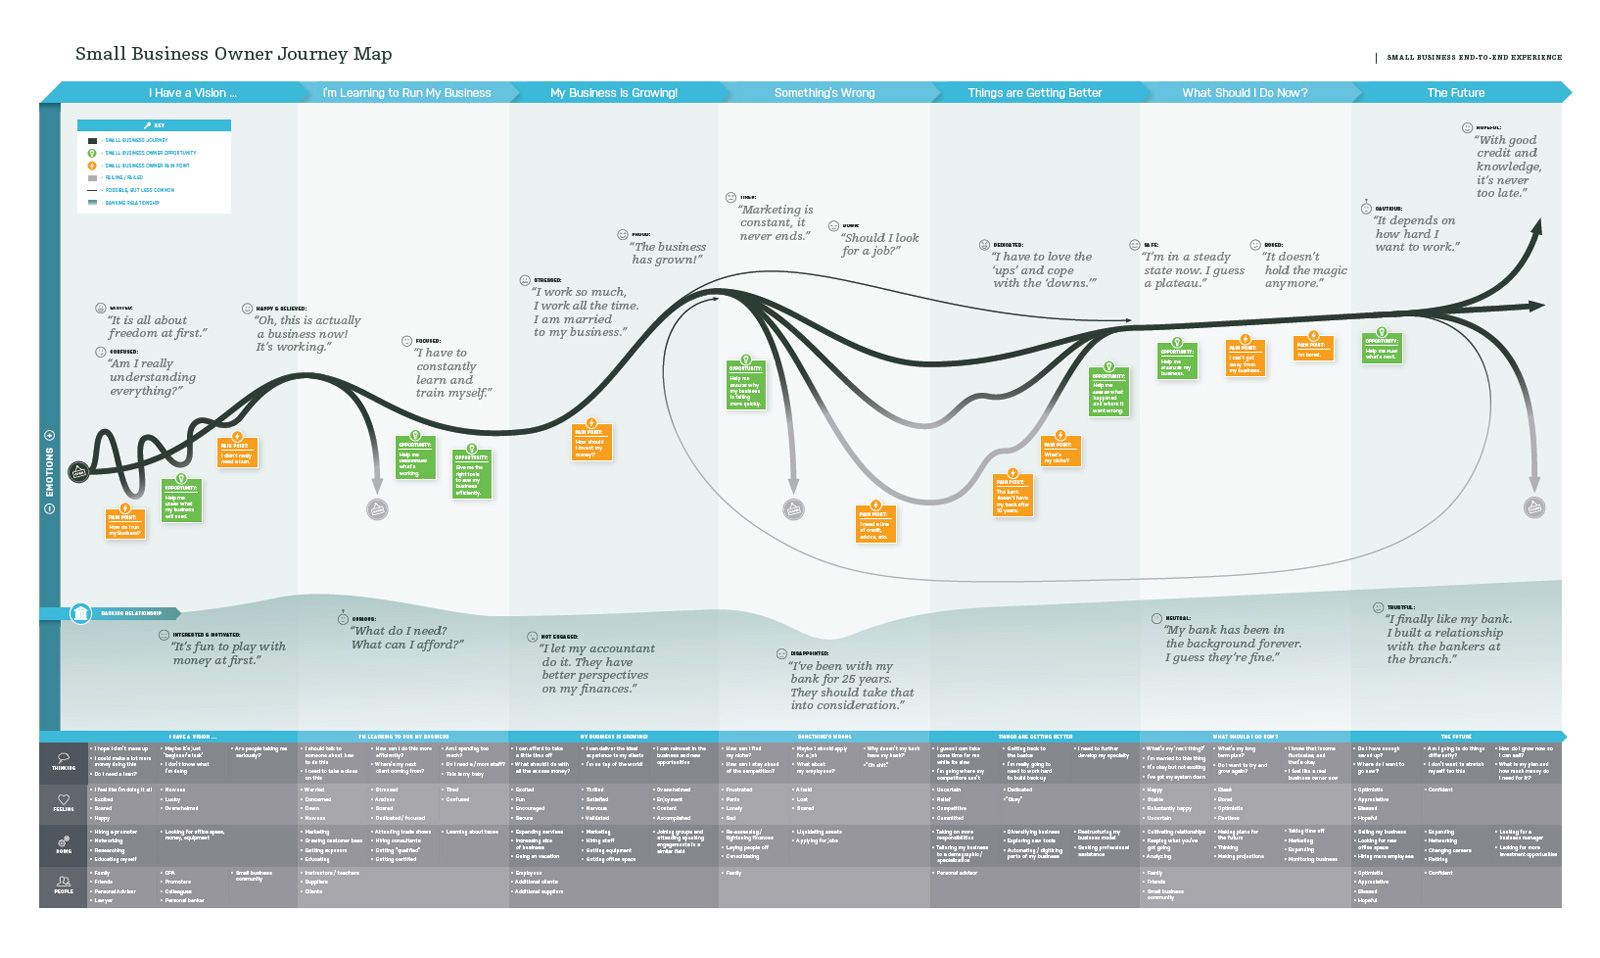 The culmination of a lot UxR was this journey map for small business owners